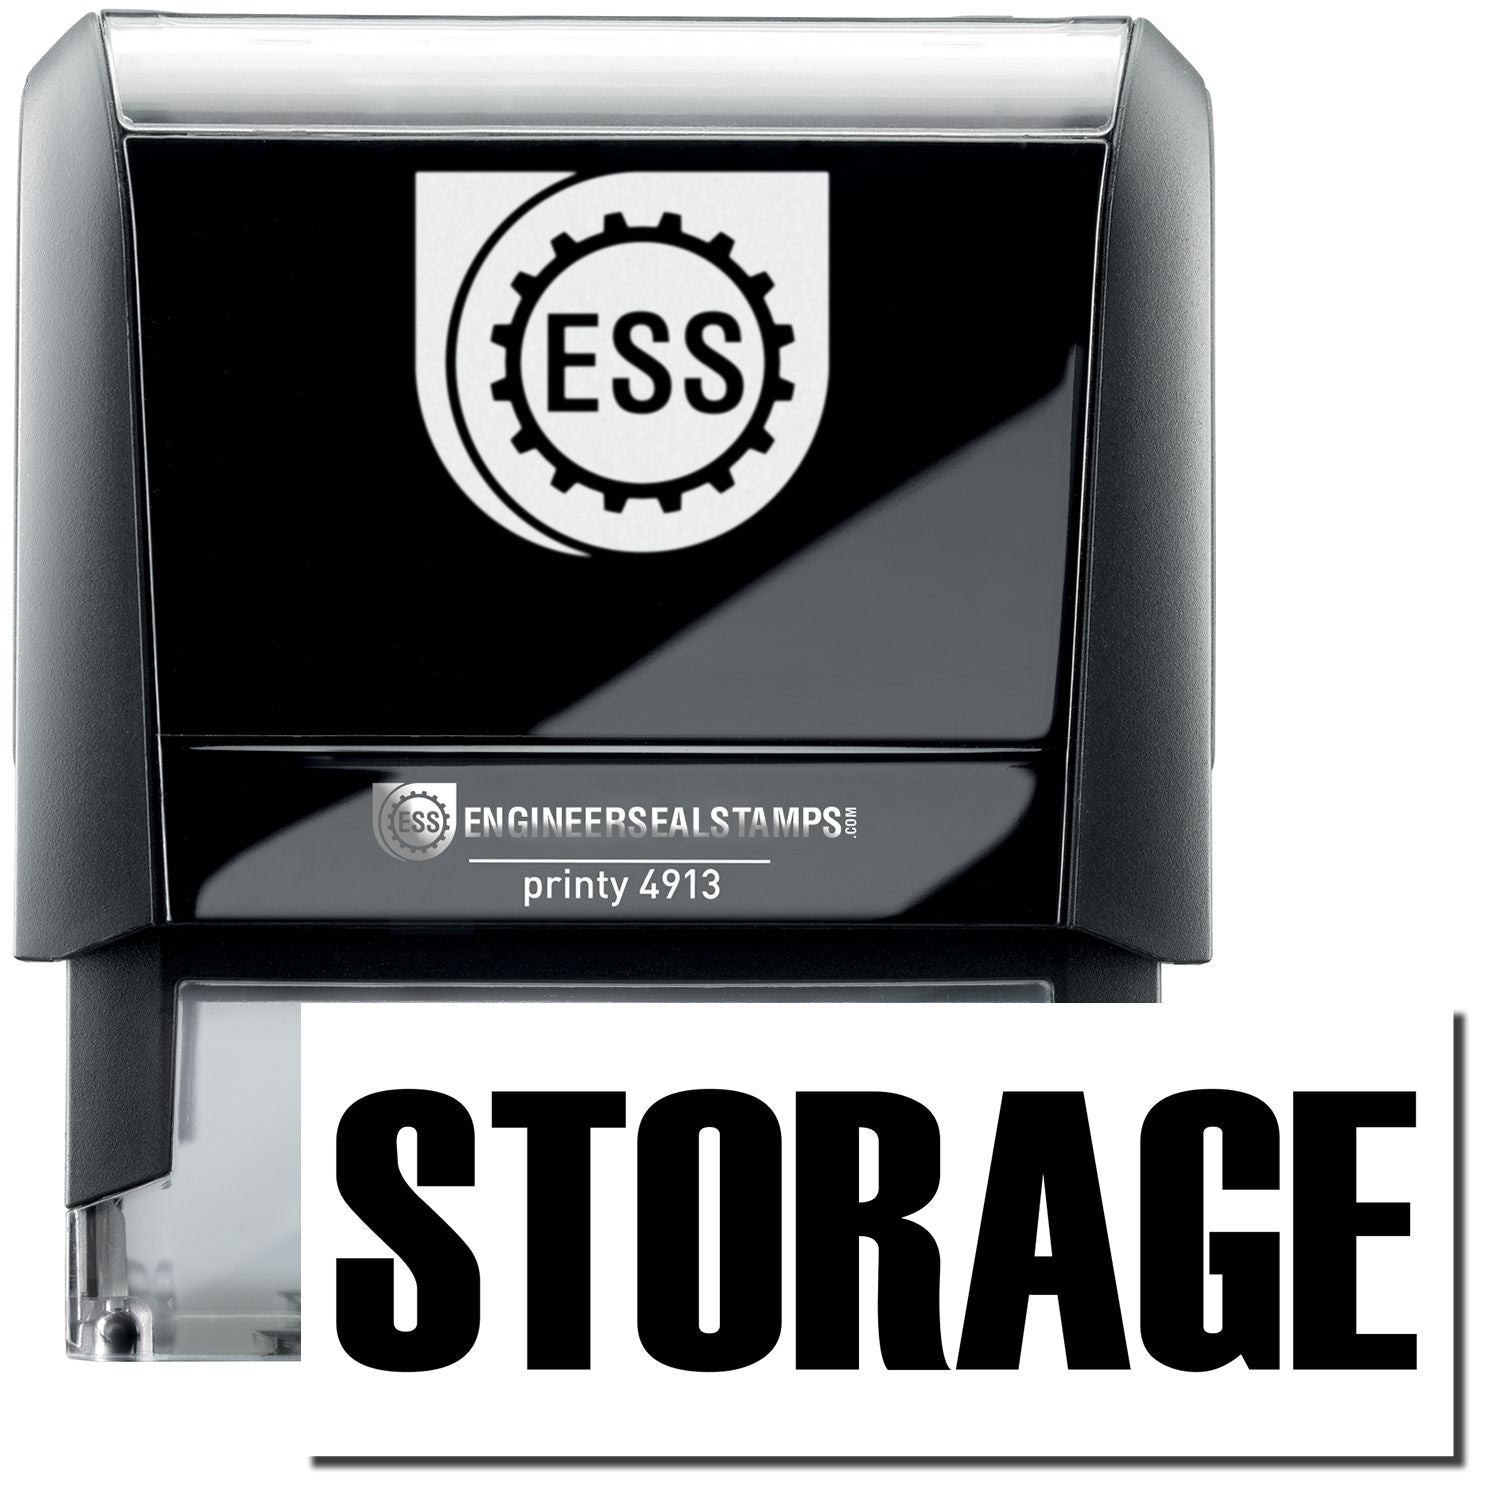 A self-inking stamp with a stamped image showing how the text "STORAGE" in a large bold font is displayed by it.